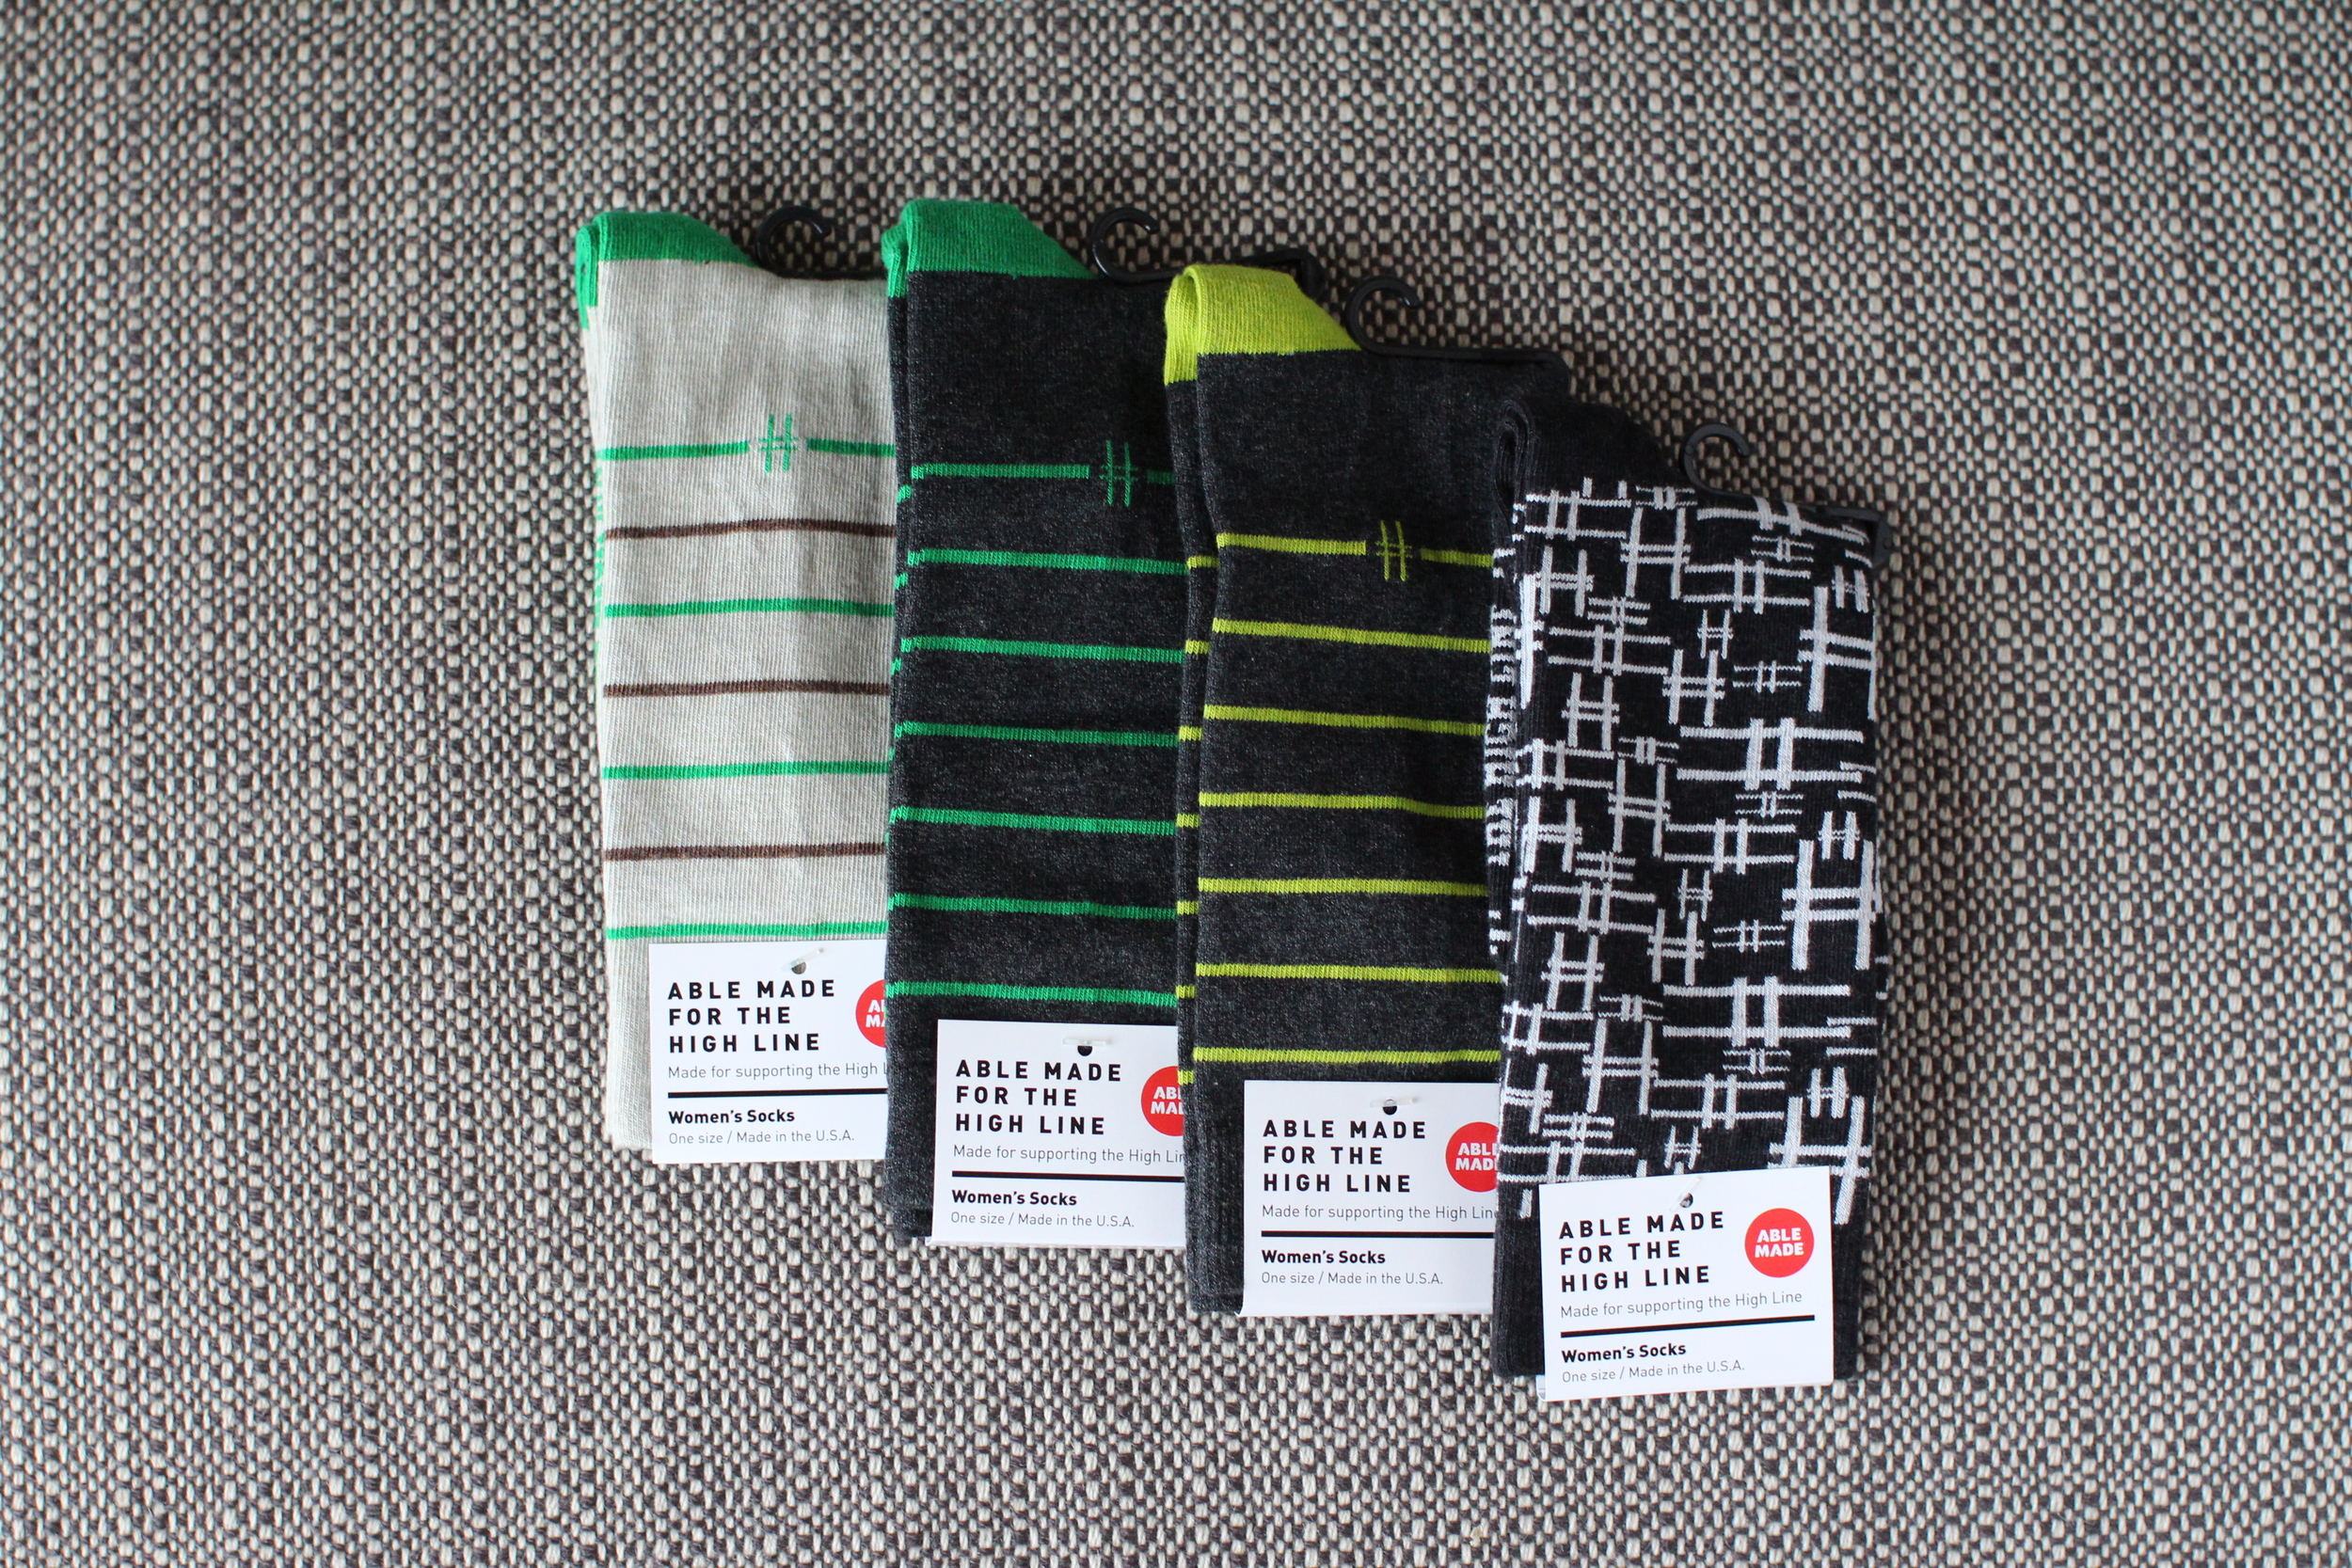 The Standard High Line Hotel Socks. Able Made x The Highline.